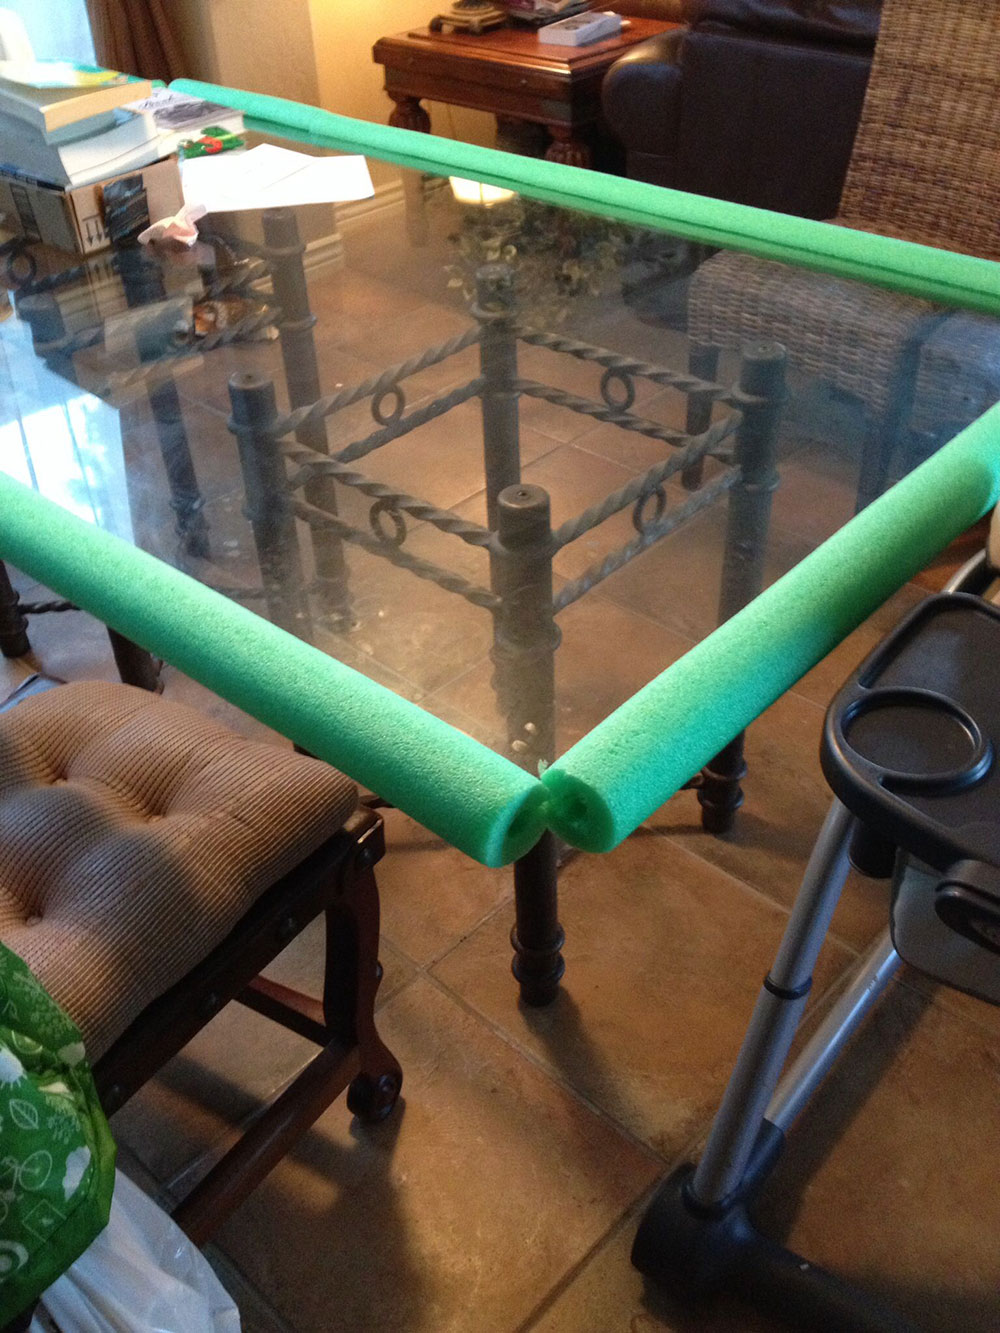 Table edges pool noodle hacks to make your life easier